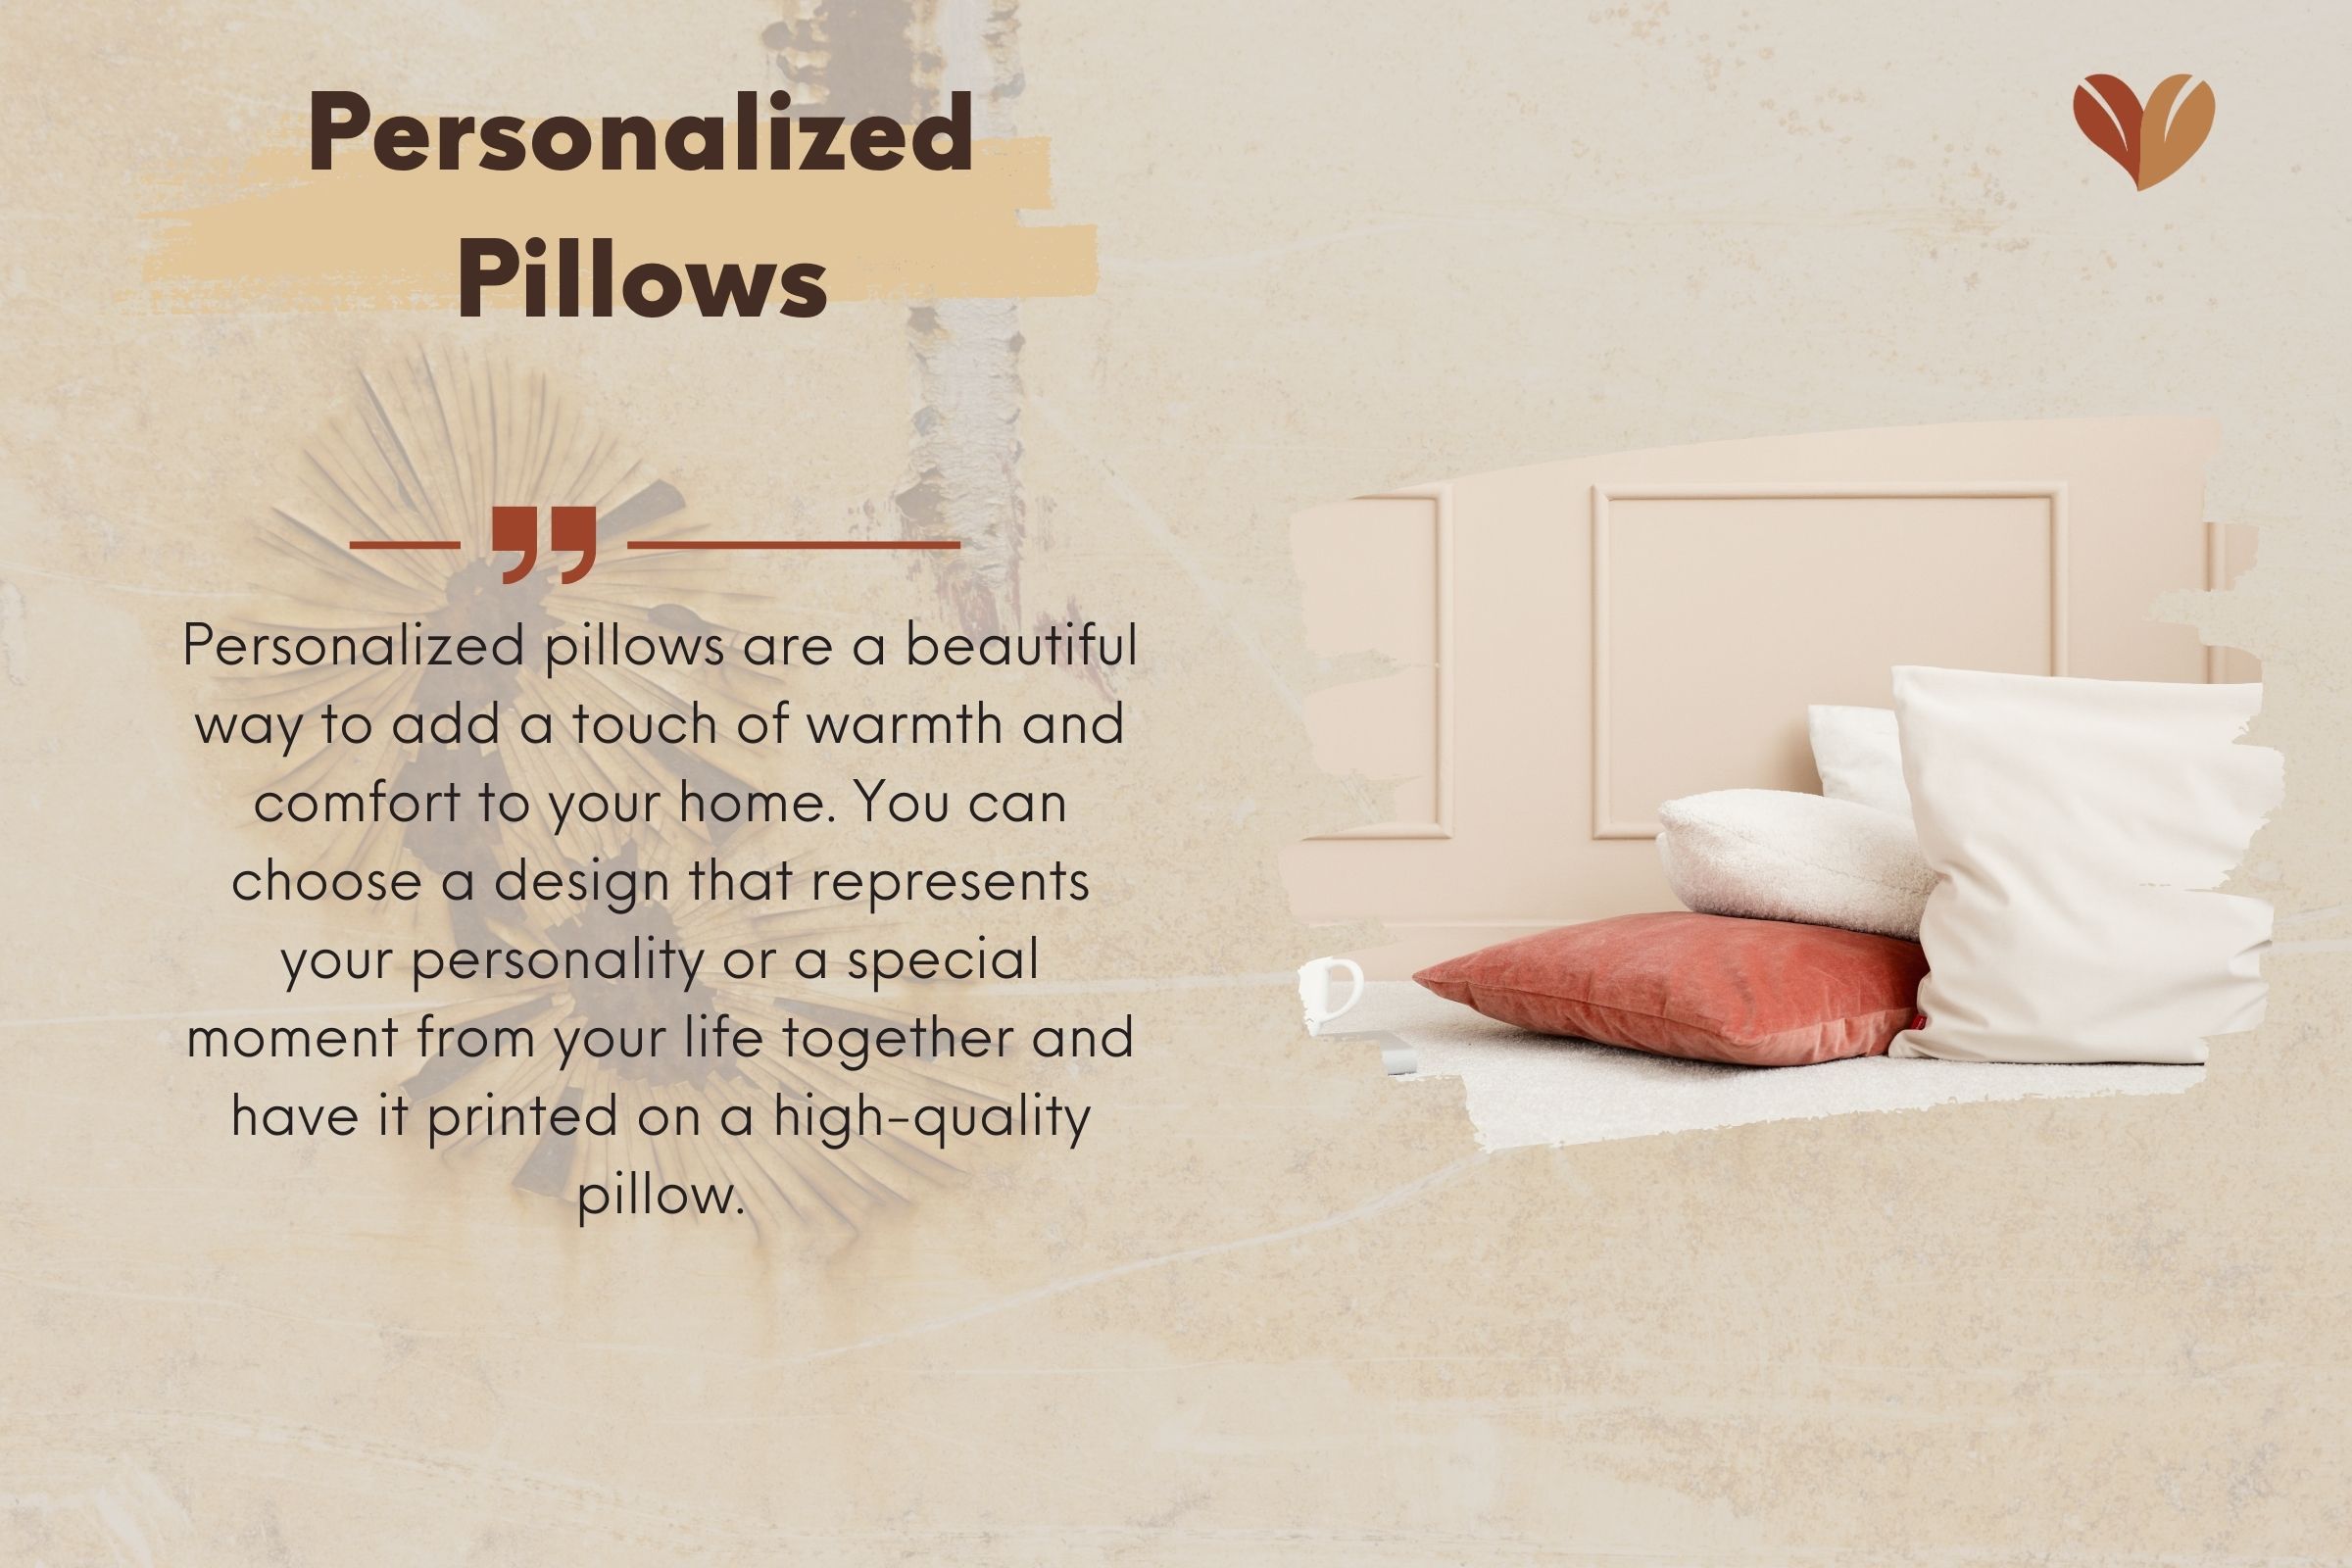 Personal pillow is a very meaningful 21st anniversary gift